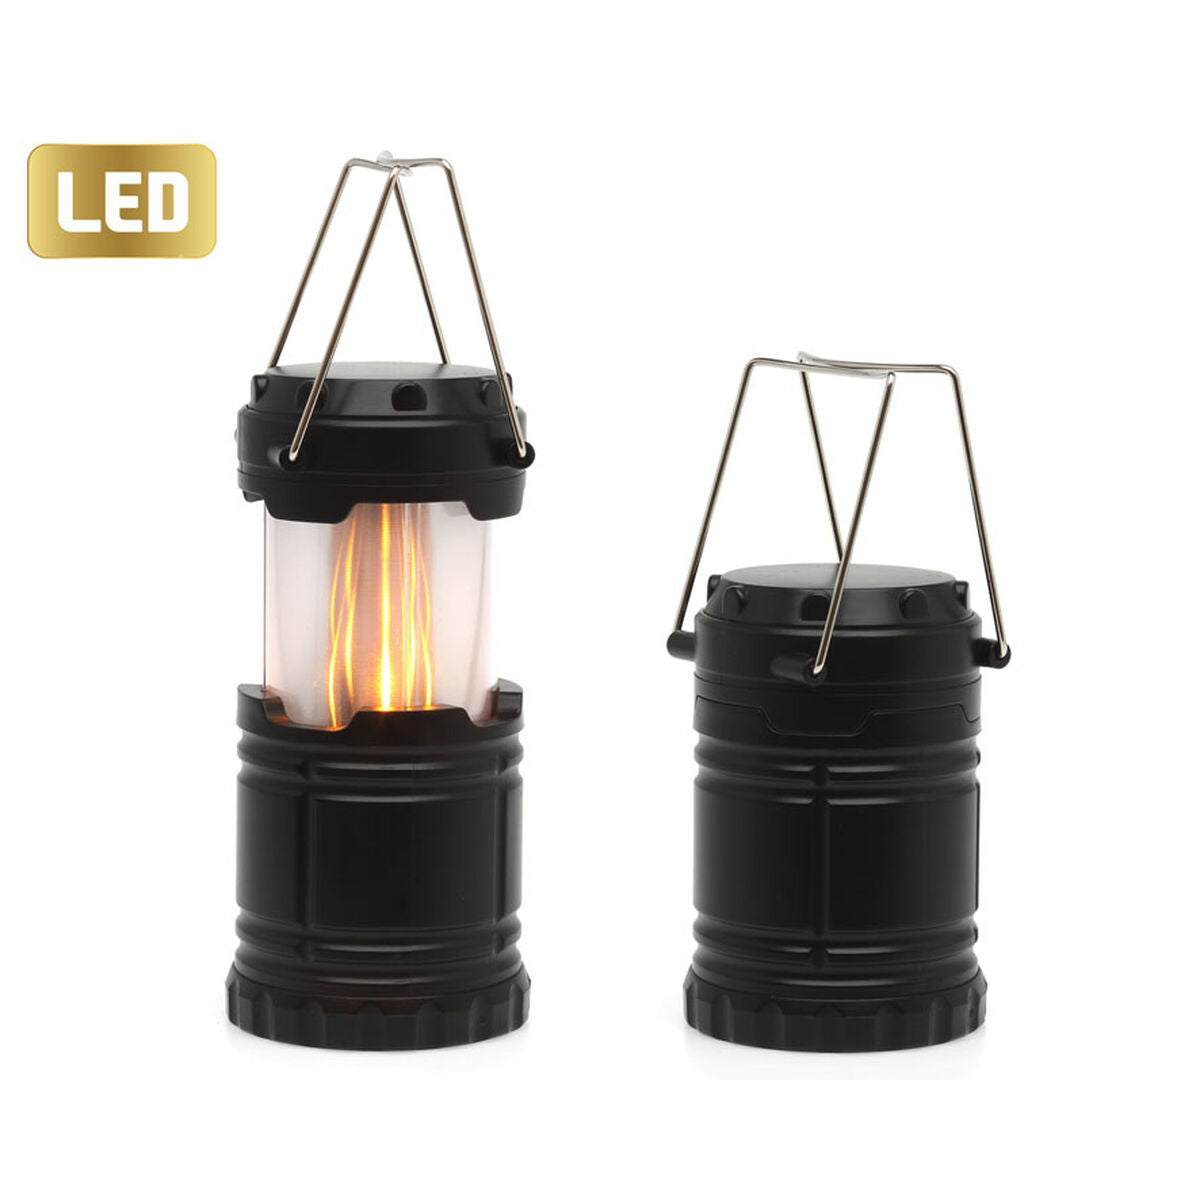 Extendierbare LED-Campinglampe mit Griffen